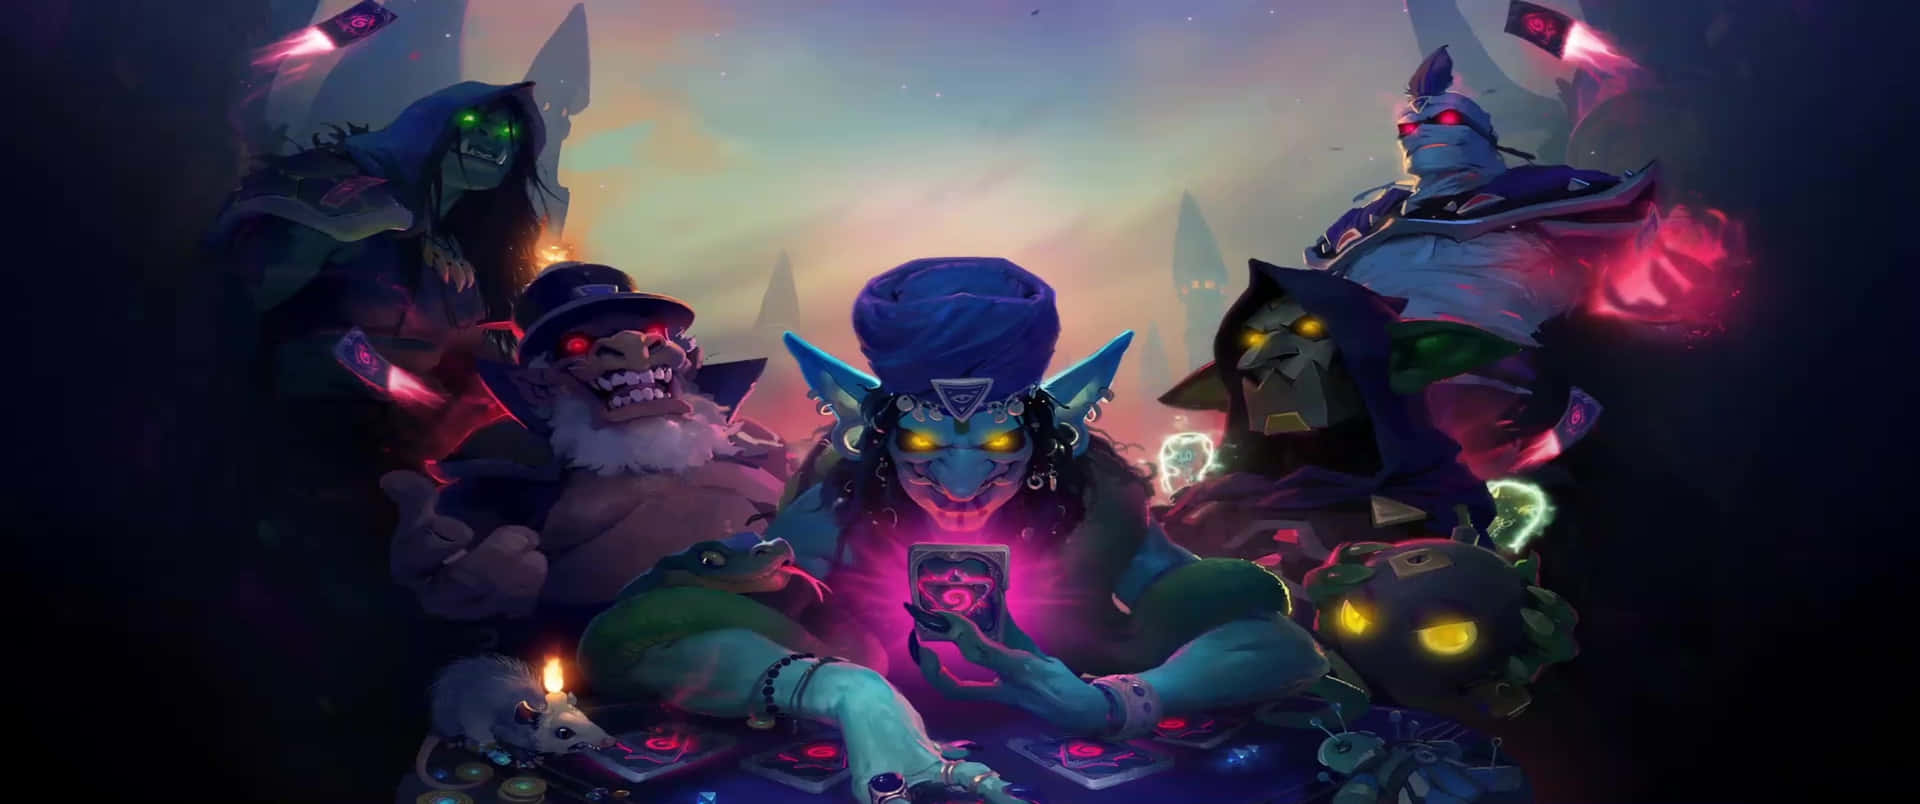 Enter the World of Hearthstone with this 3440x1440p Epic Background